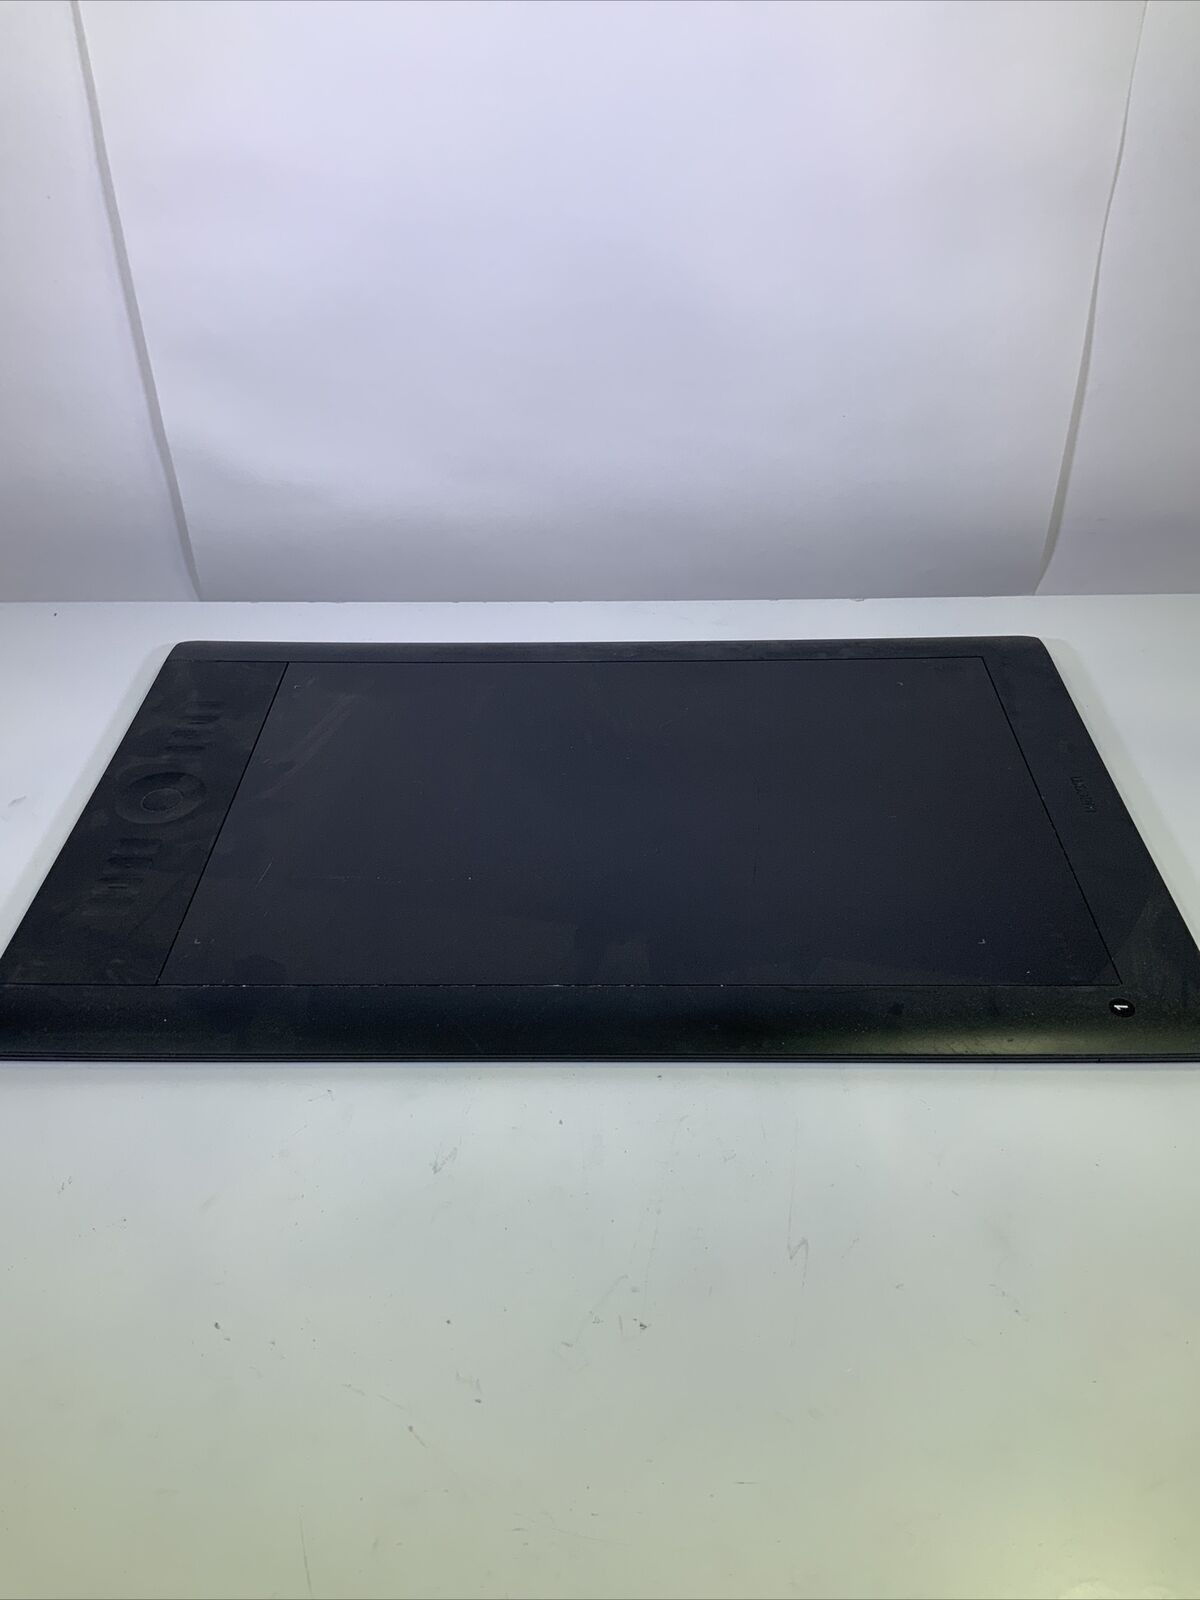 Wacom Intuos5 Touch Large PTH-850 Tablet - NG H3D